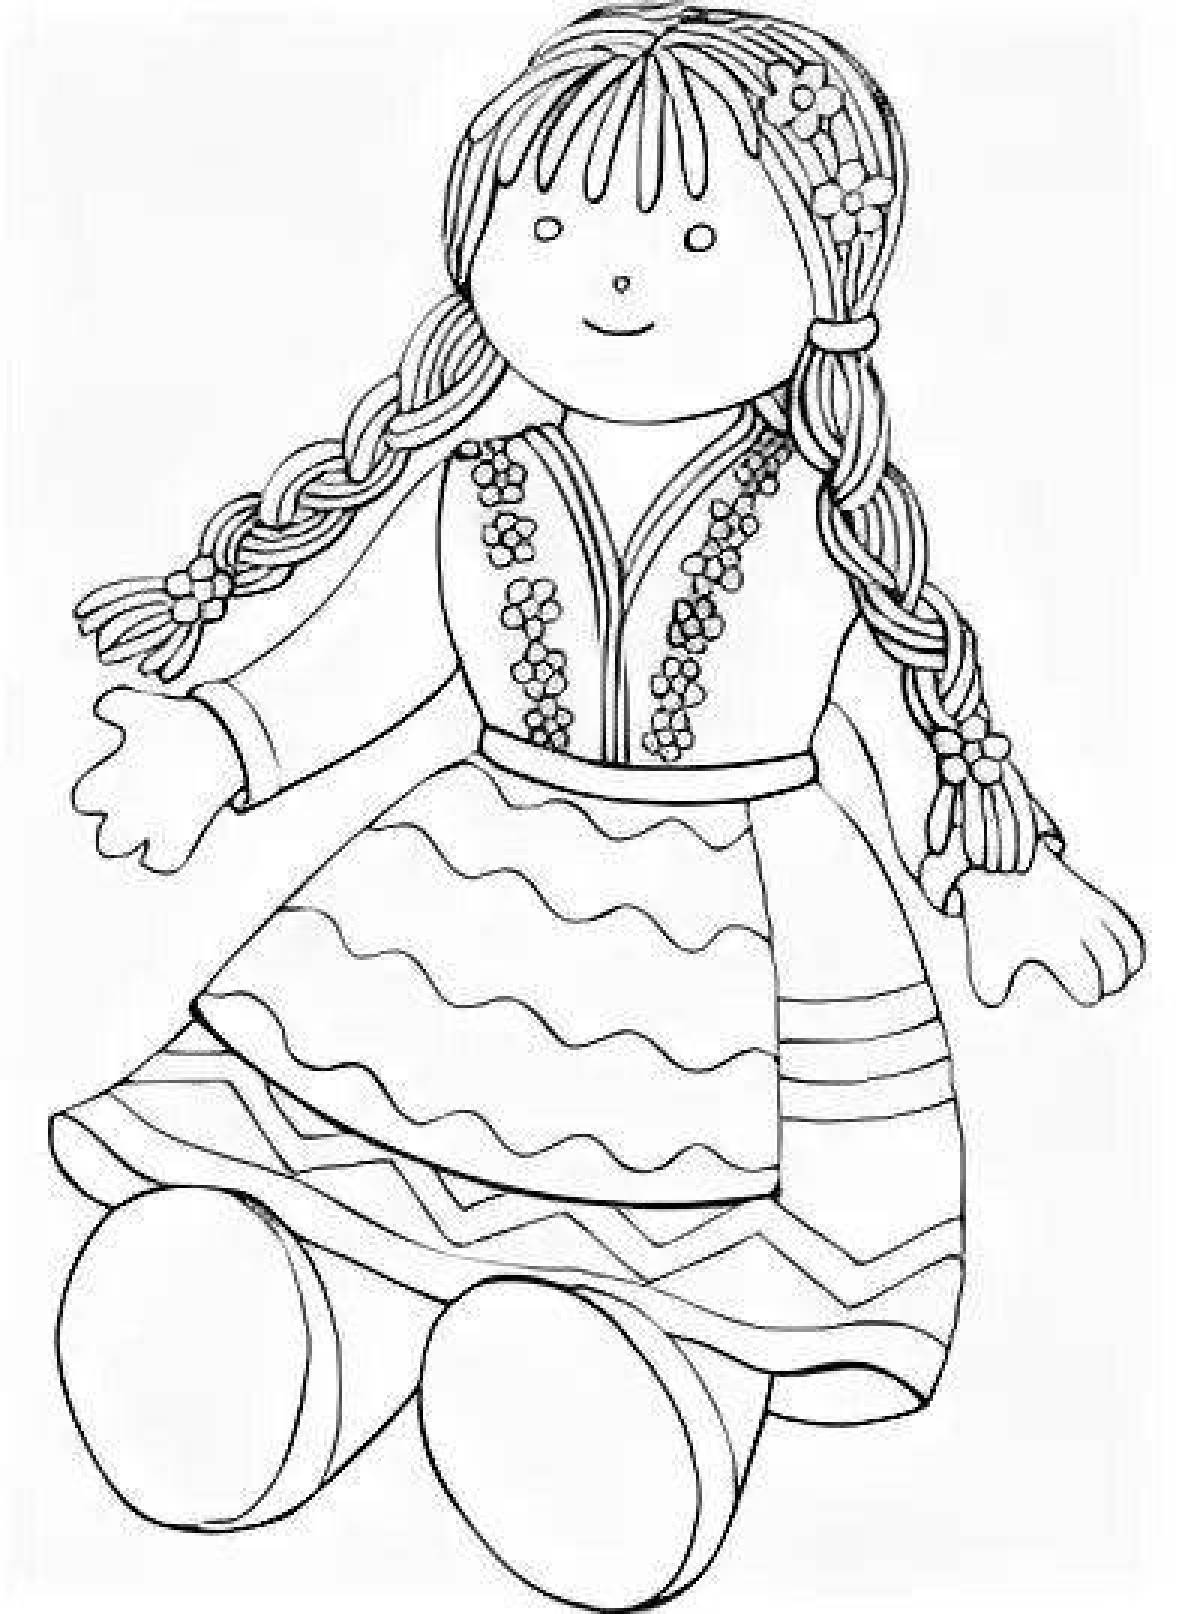 Coloring book blooming carnival doll